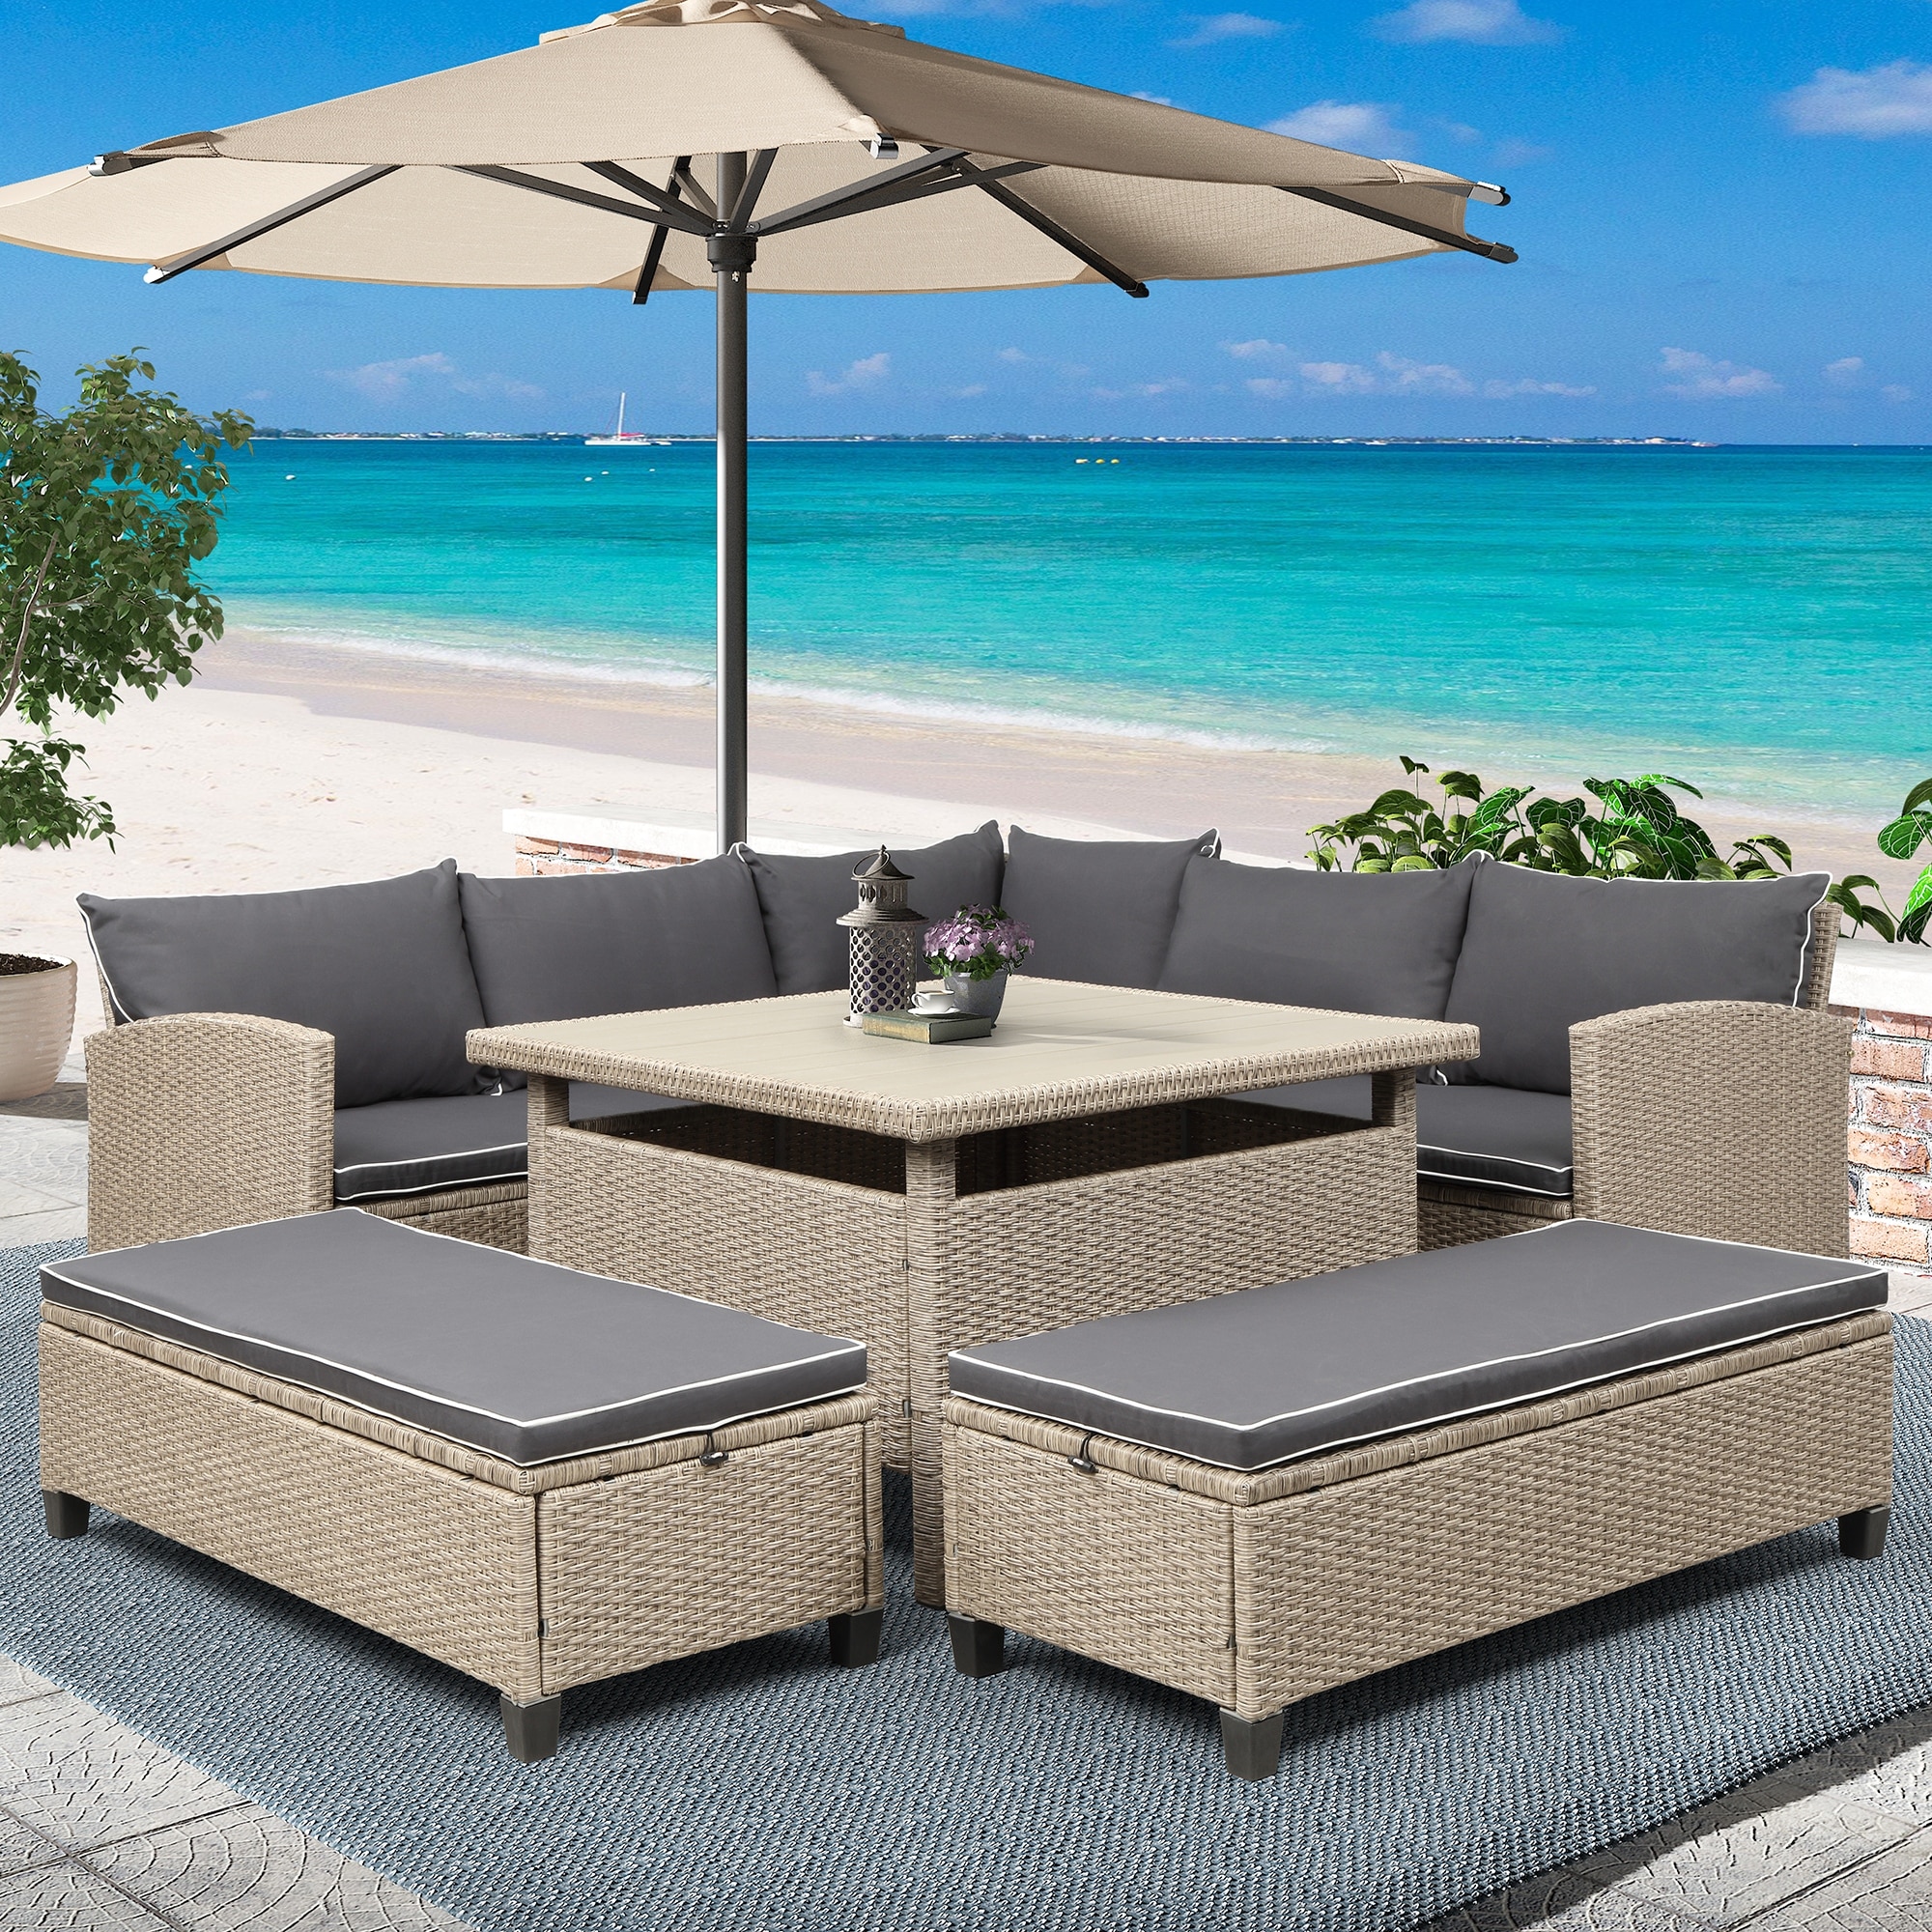 6-piece Patio Furniture Outdoor Rattan Modular Versatility Sectional Sofa Set  With Table And Benches  Ergonomic Armrest